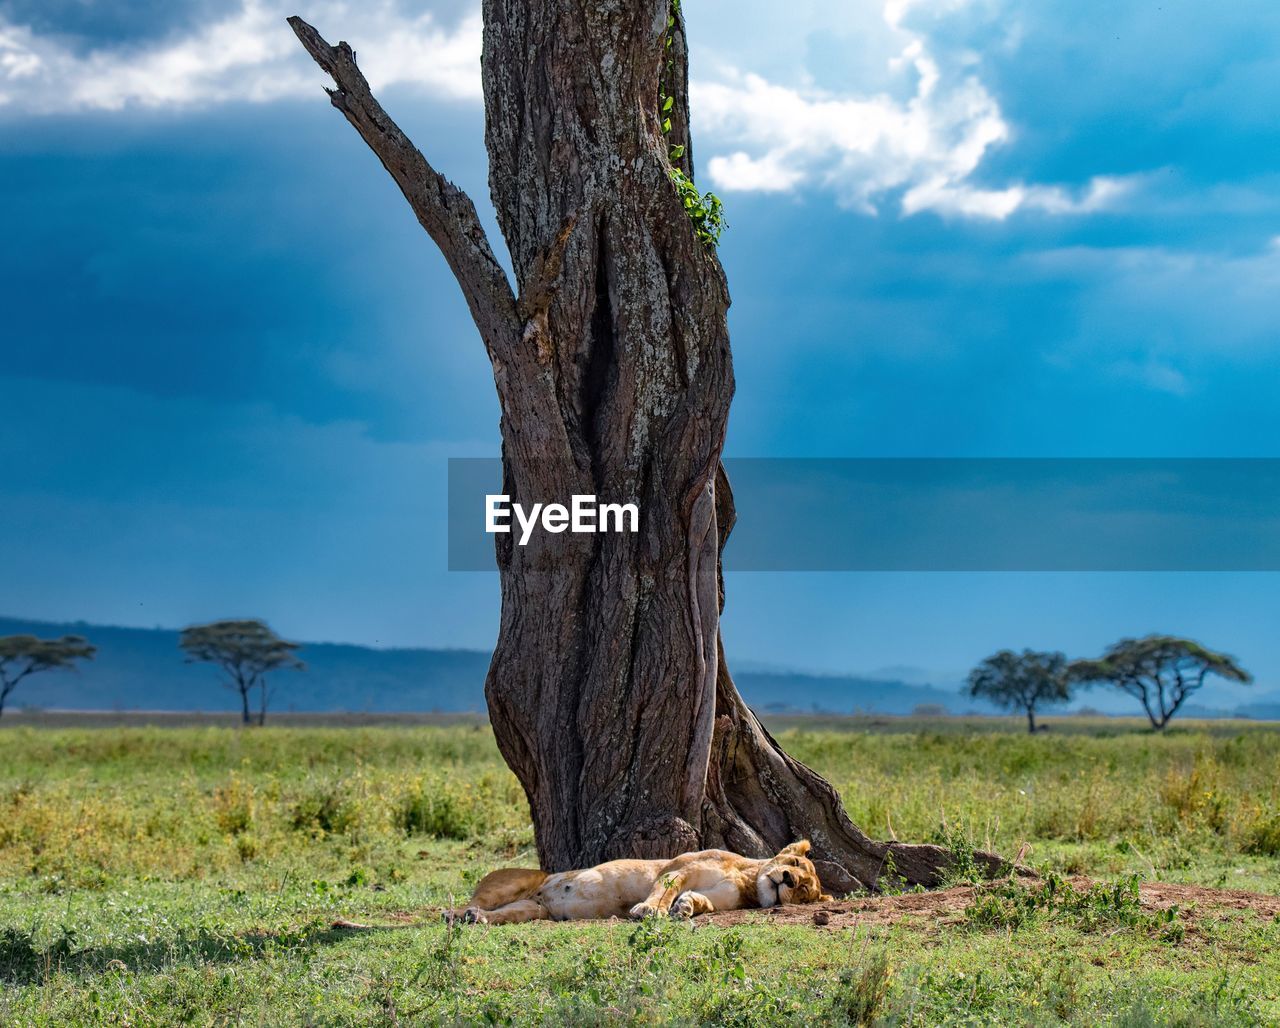 Lioness sleeping by tree on field against sky